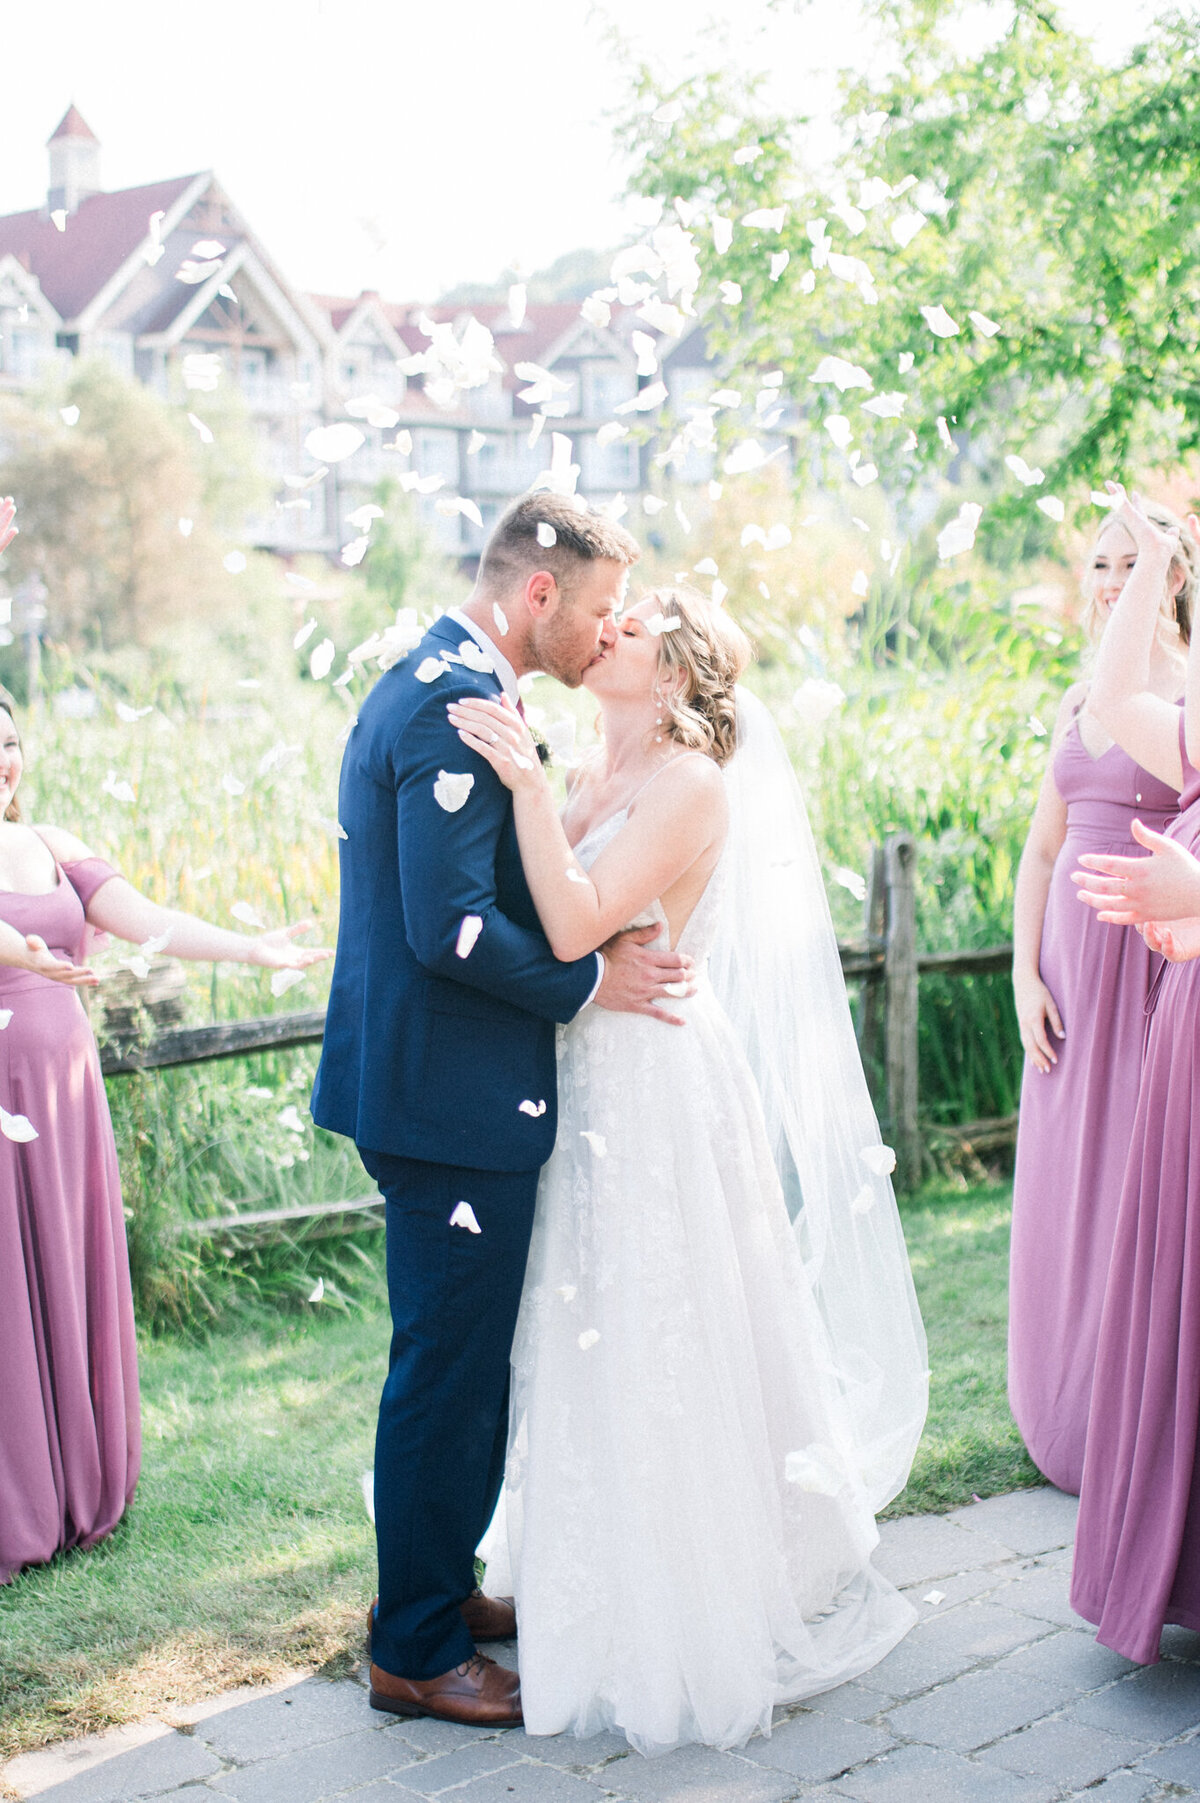 Bride and groom kiss while wedding party throws flower pedals over them captured by Niagara wedding photographer